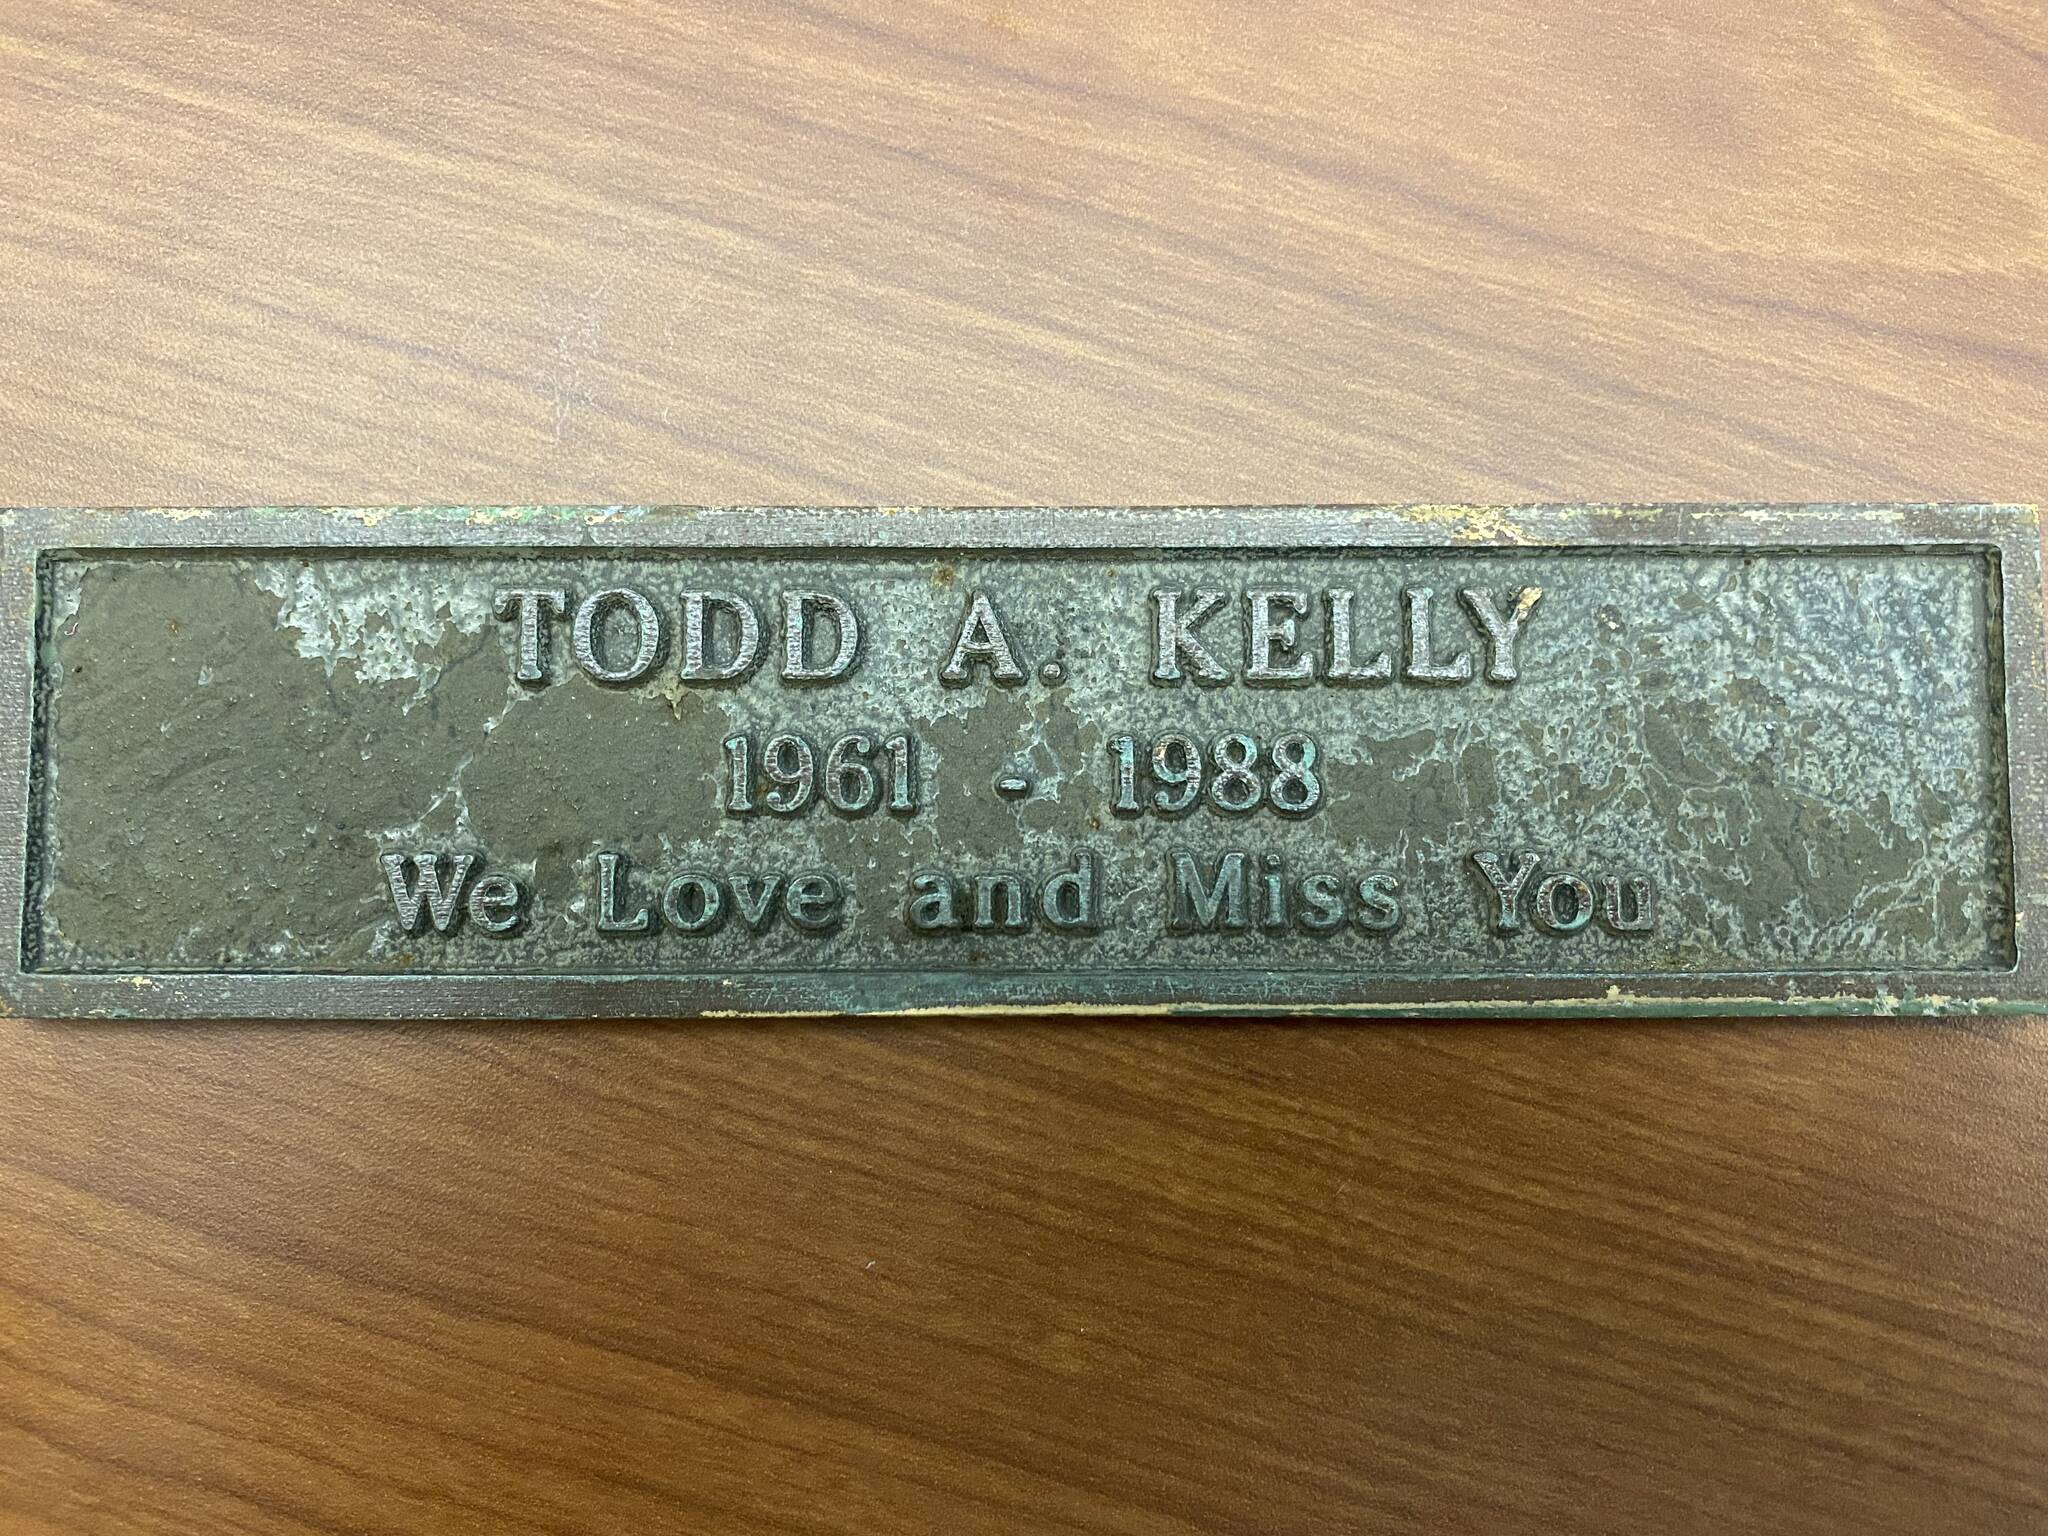 Photos provided
These plaques were removed from Deception Pass bridge during painting. Anyone with information about how to reach the families of Todd A. Kelly and Brian R. Rudolph should reach out to Jason Armstrong.